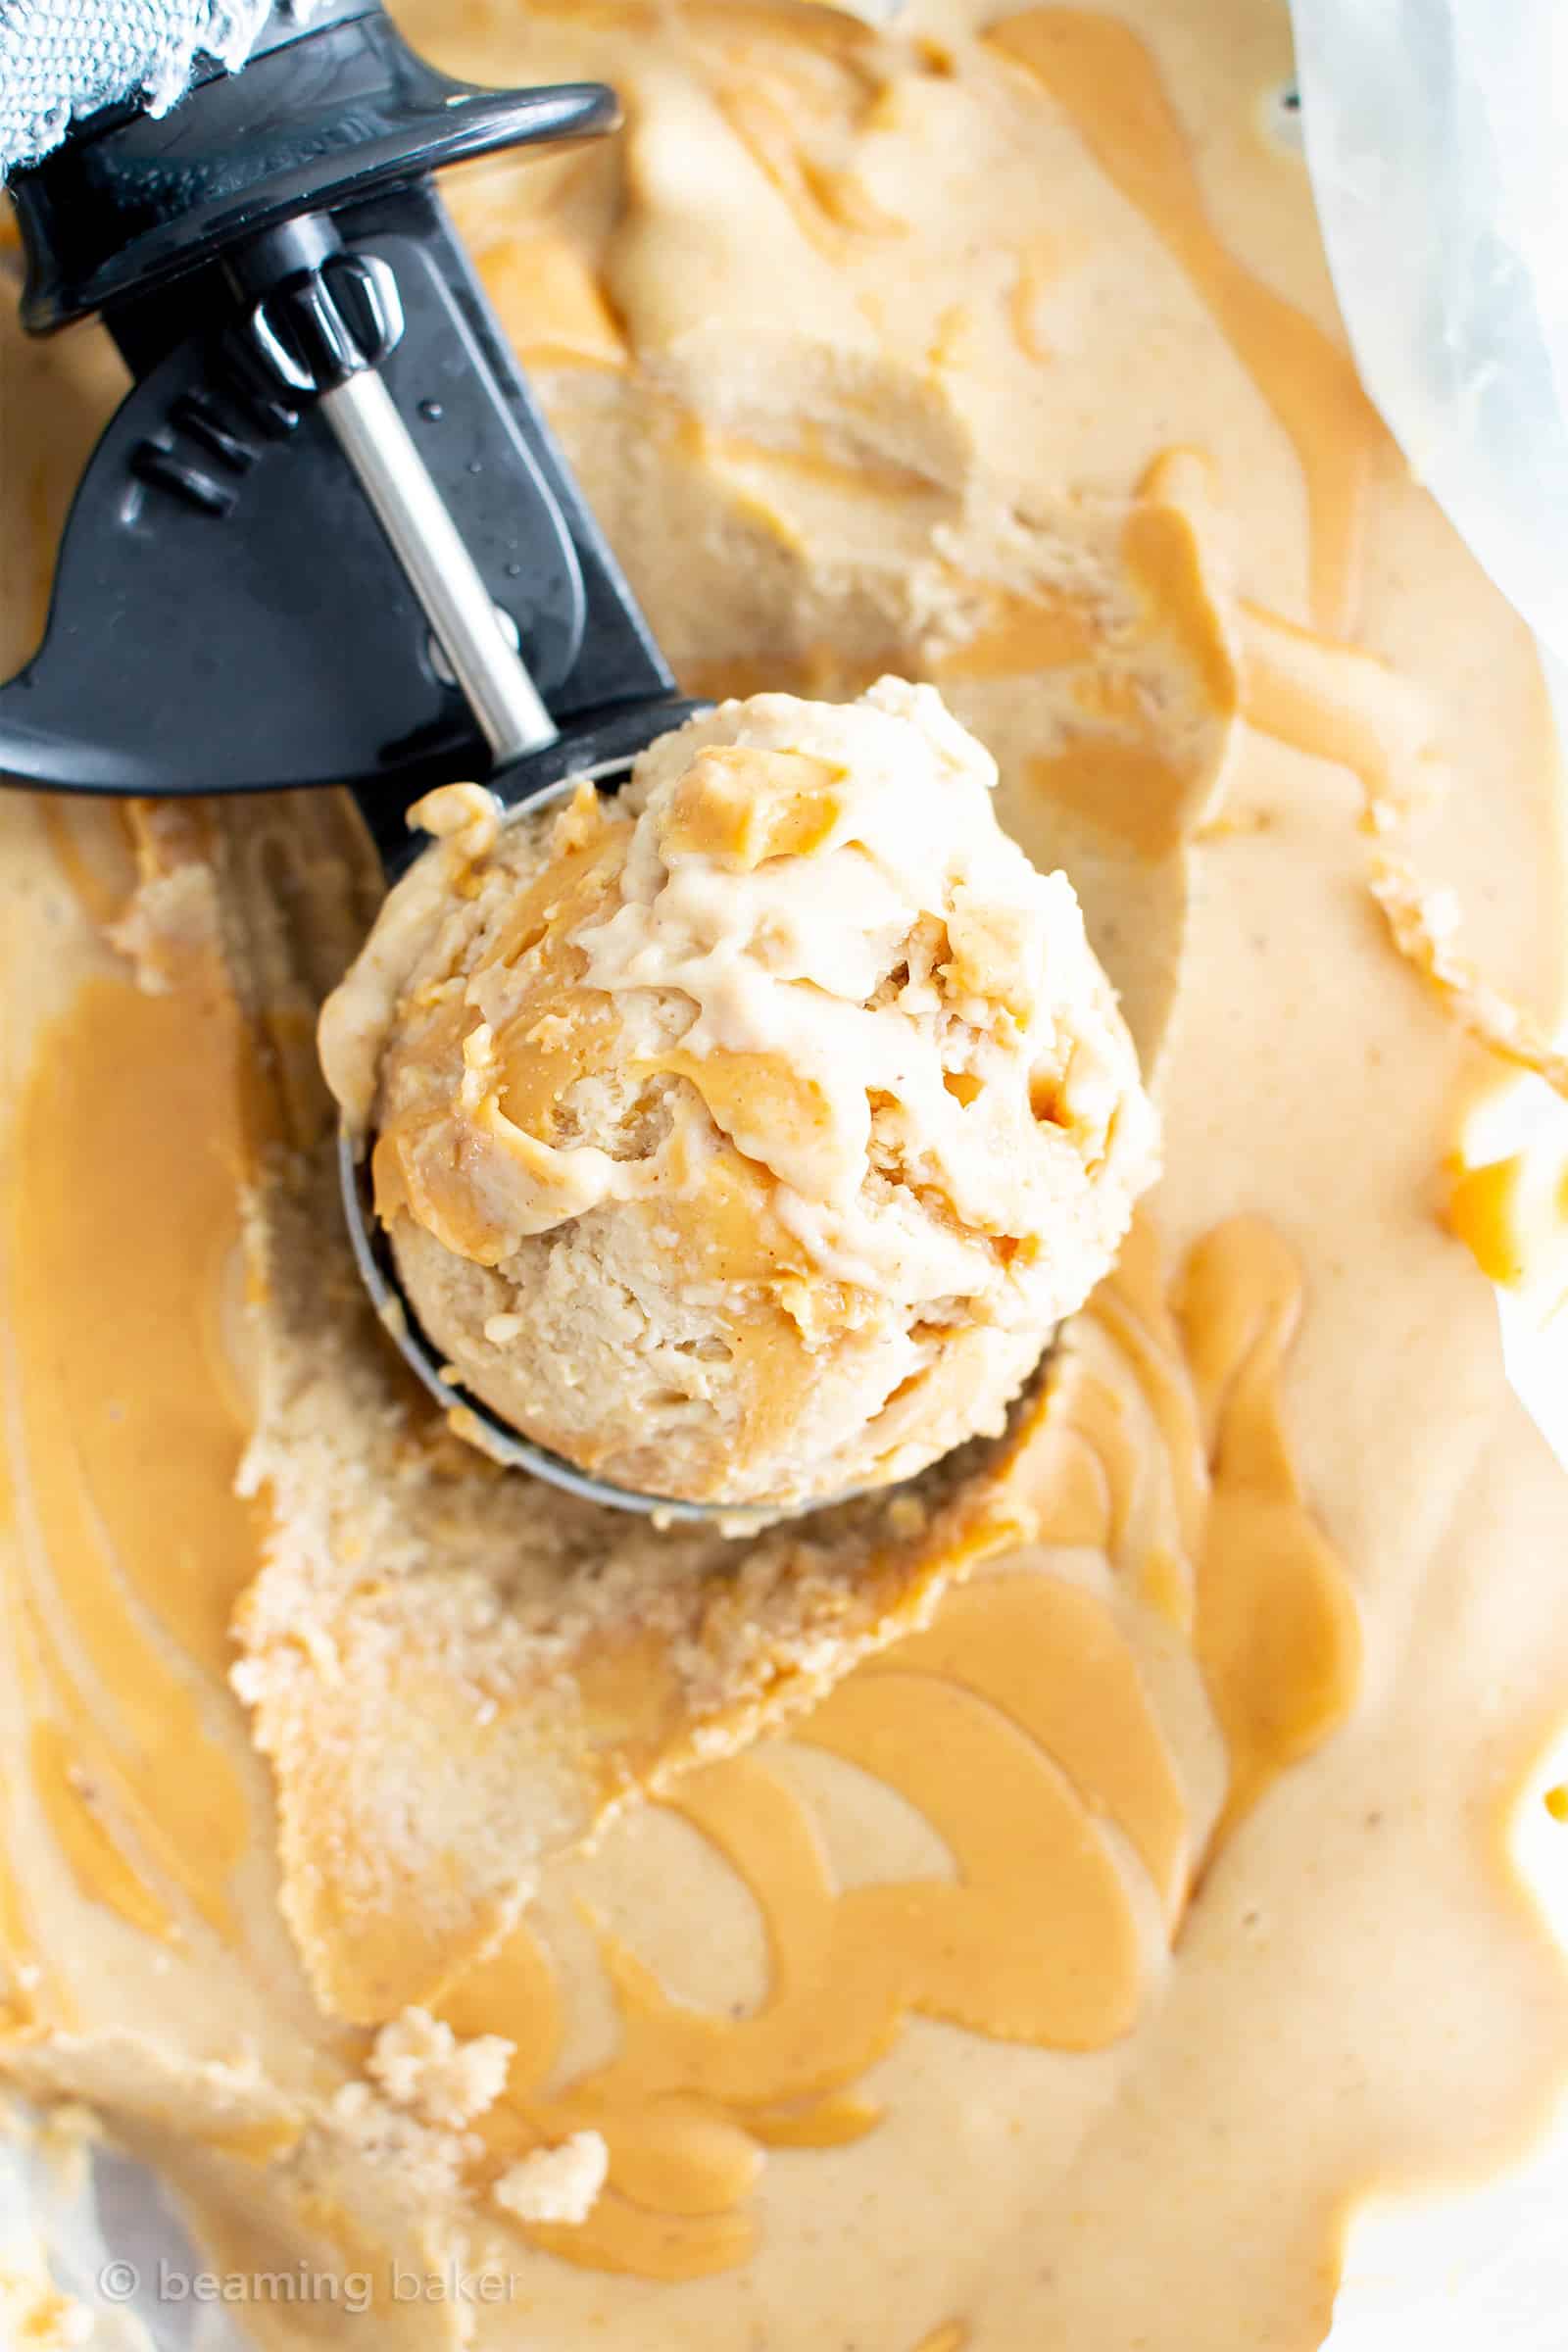 25+ Healthy Easy Peanut Butter Desserts Recipes (V, GF): a seriously sweet collection of the best healthy desserts bursting with peanut butter deliciousness! #Vegan #GlutenFree #DairyFree #RefinedSugarFree #Desserts #PeanutButter | Recipes on BeamingBaker.com